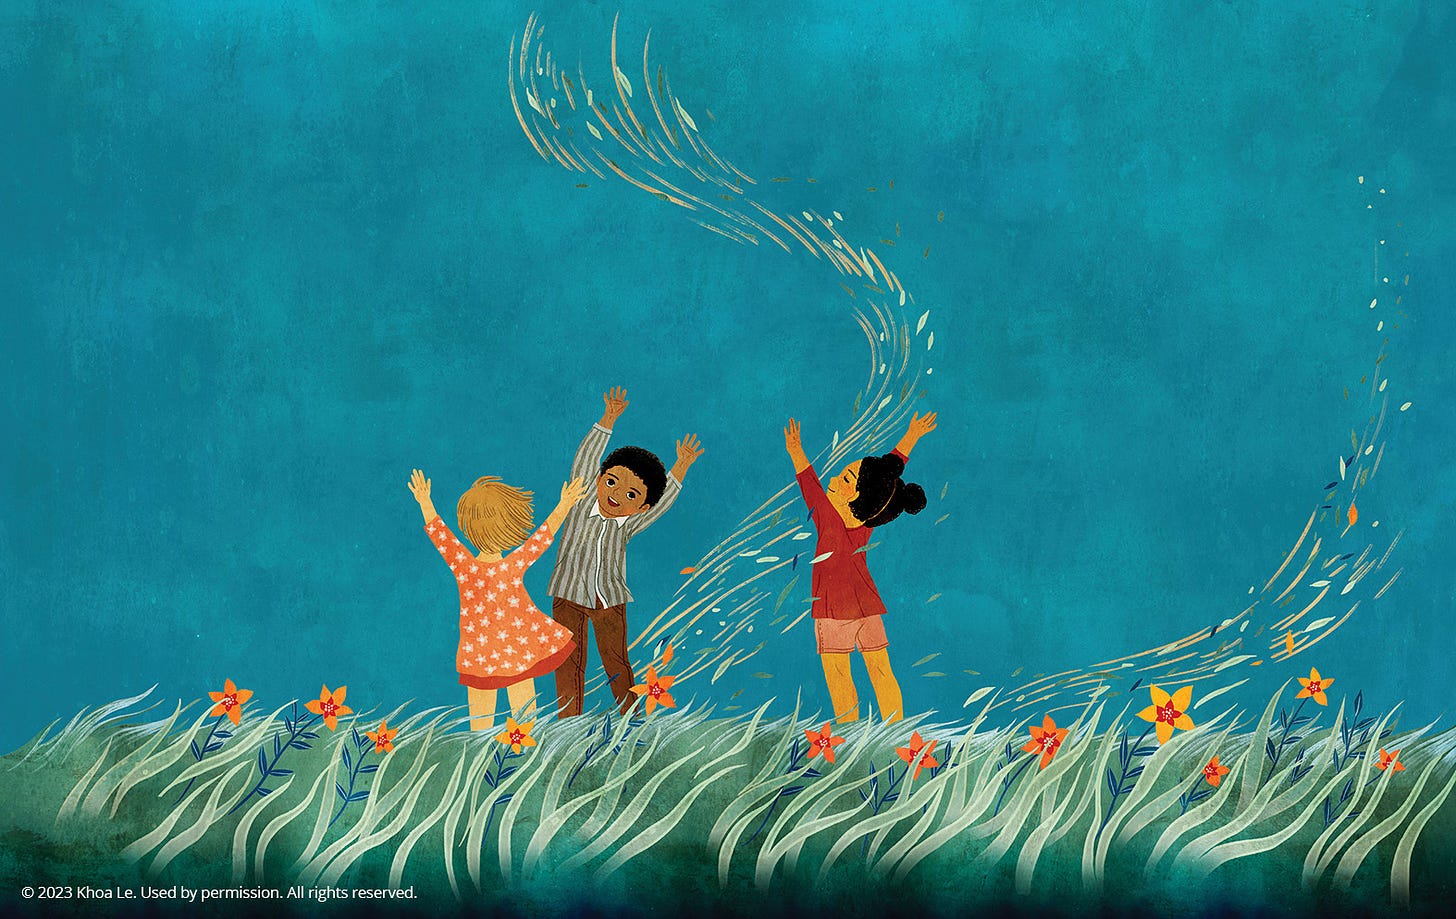 An illustration of three children reaching their arms up joyously in a windy field.